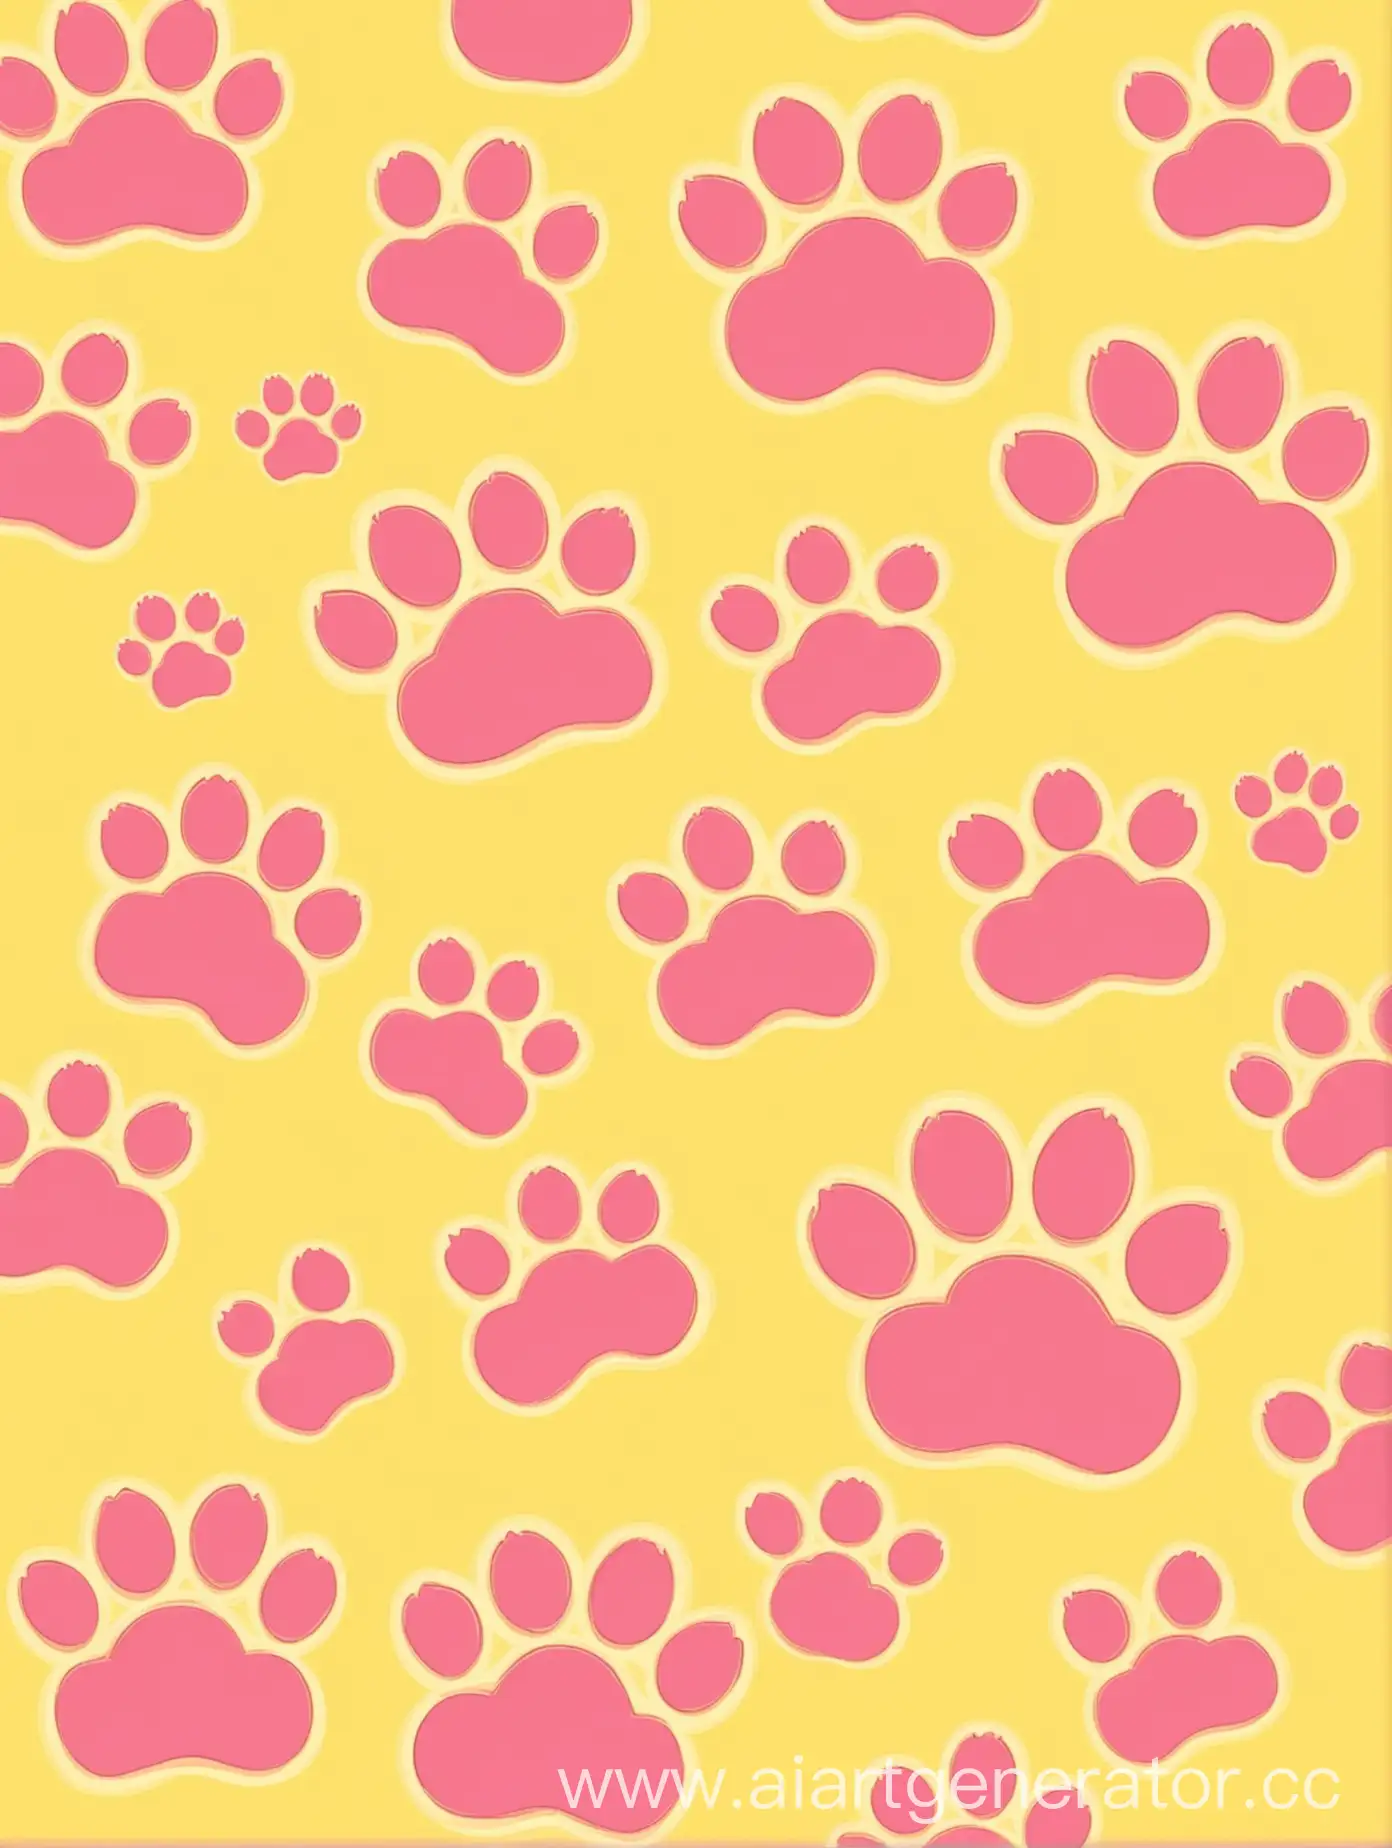 Cartoon-Cat-Playing-on-Vibrant-YellowPink-Background